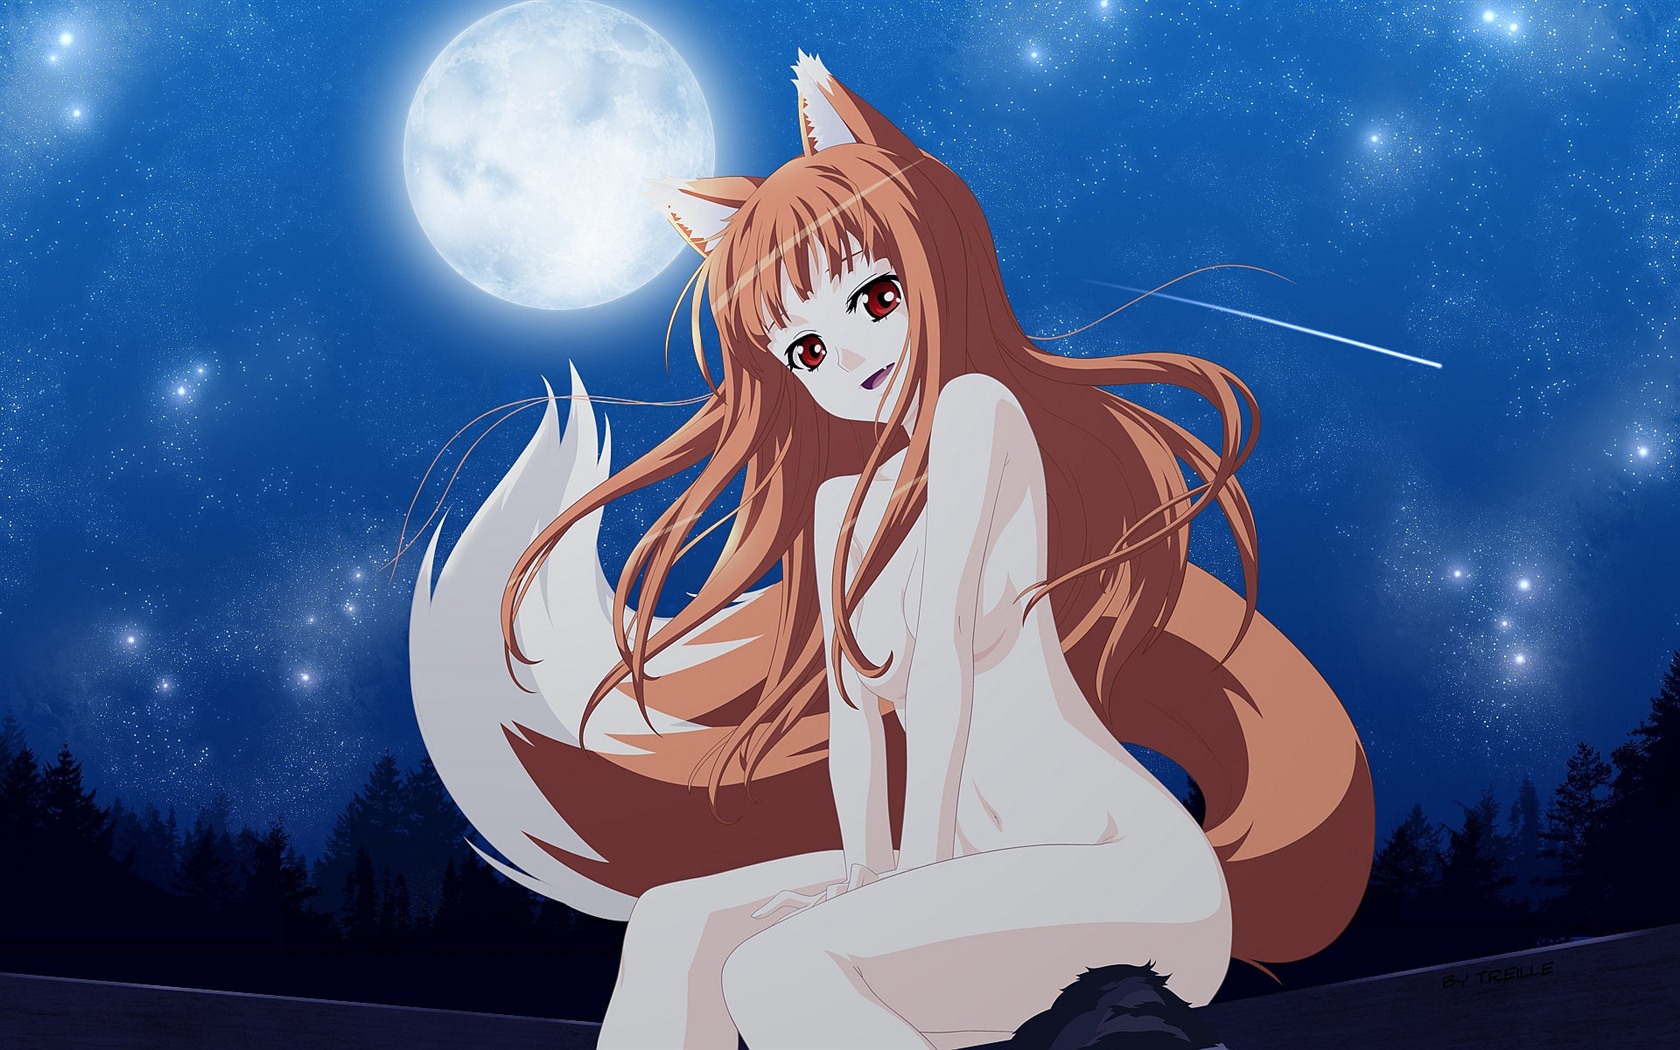 Spice and Wolf HD Wallpaper #7 - 1680x1050